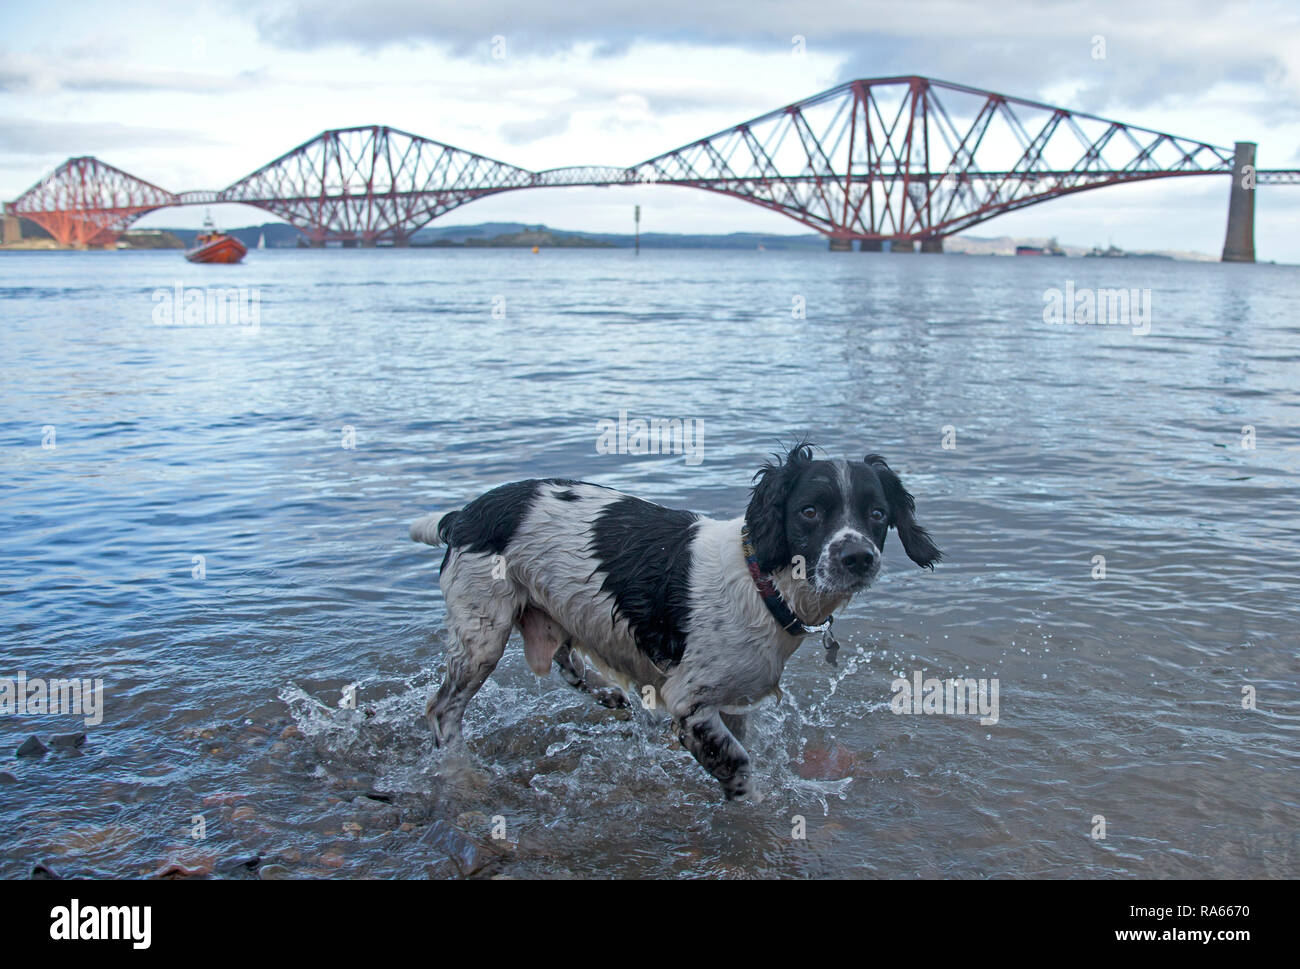 South Queensferry, Edinburgh, Scotland UK. 01 January 2019. Queensferry New Year Loony Dook, the annual dip in the Firth of Forth in the shadow of the world-famous Forth Rail Bridge. Takes place on the third day of the Edinburgh Hogmany New Year celebrations. Maximum capacity crowd and even Hendrix the spaniel joined in once the other participants left the water Stock Photo